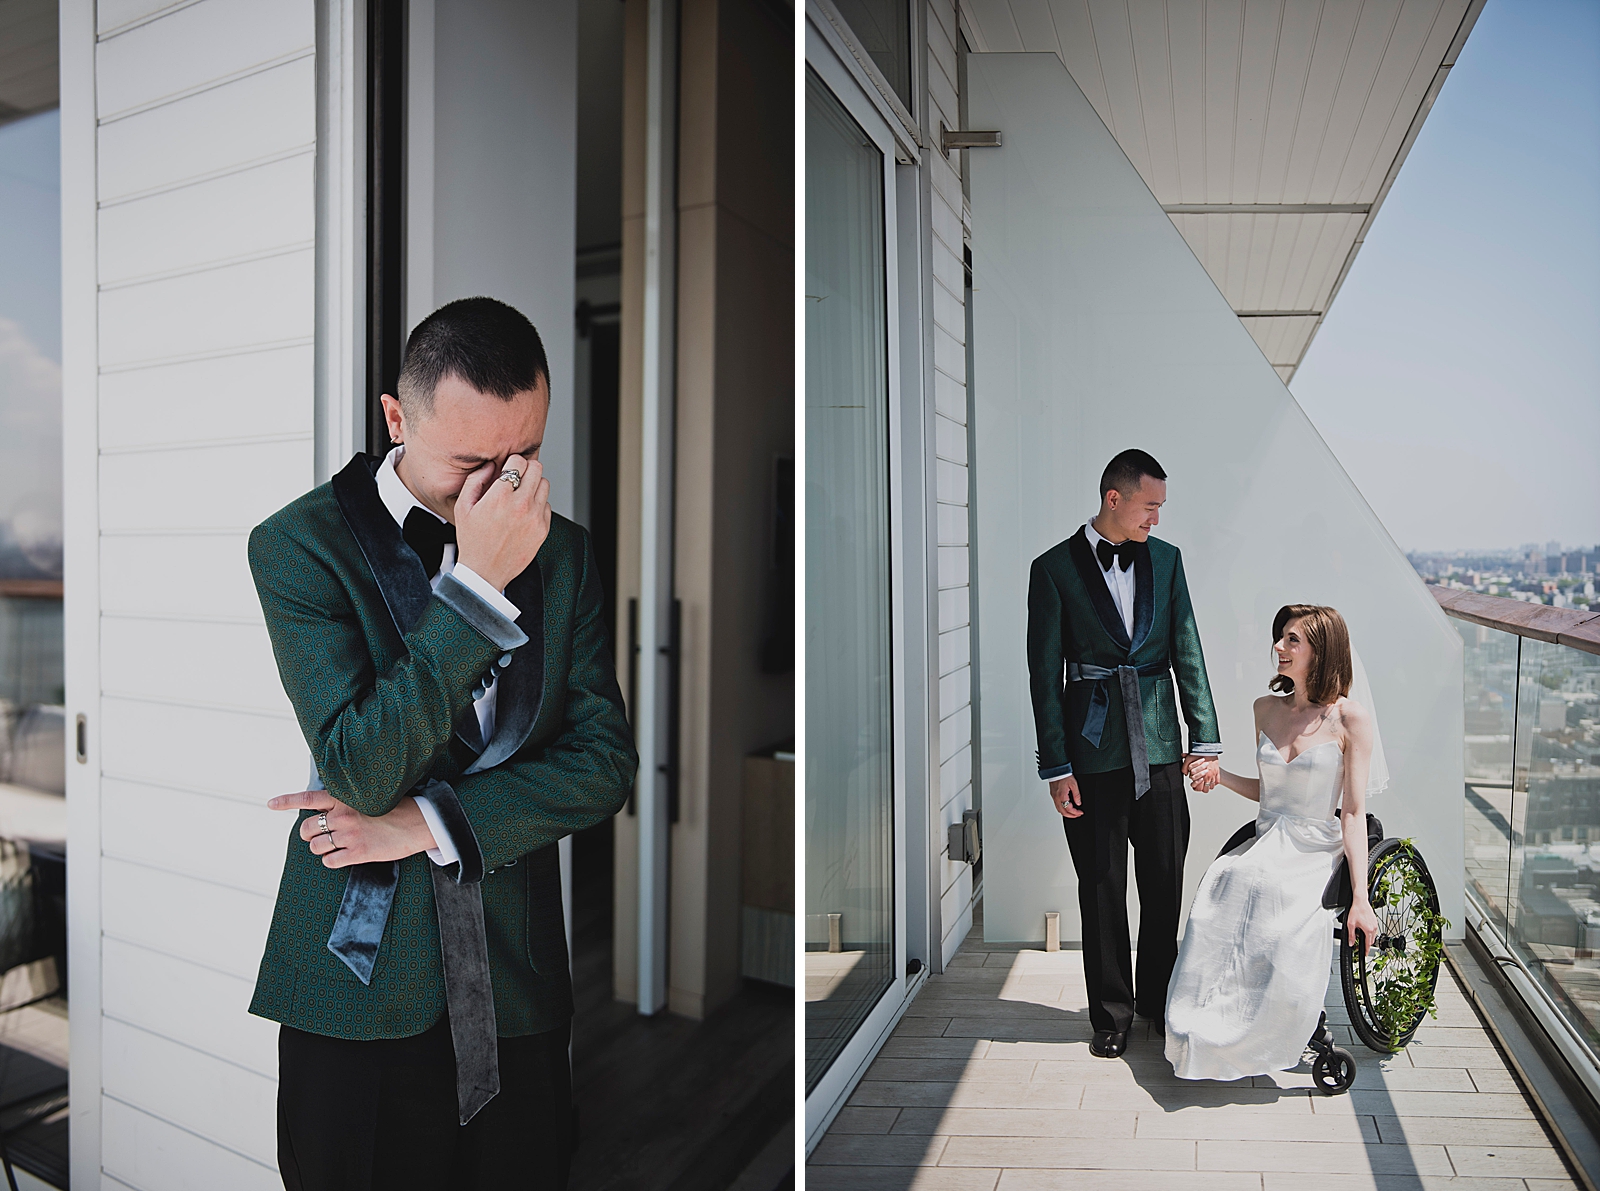 Left photo: Upper body shot of the groom getting emotional as he sees his bride during their first look.
Right photo: Full body shot of the bride and groom smiling at each other as they hold hands on a balcony. 